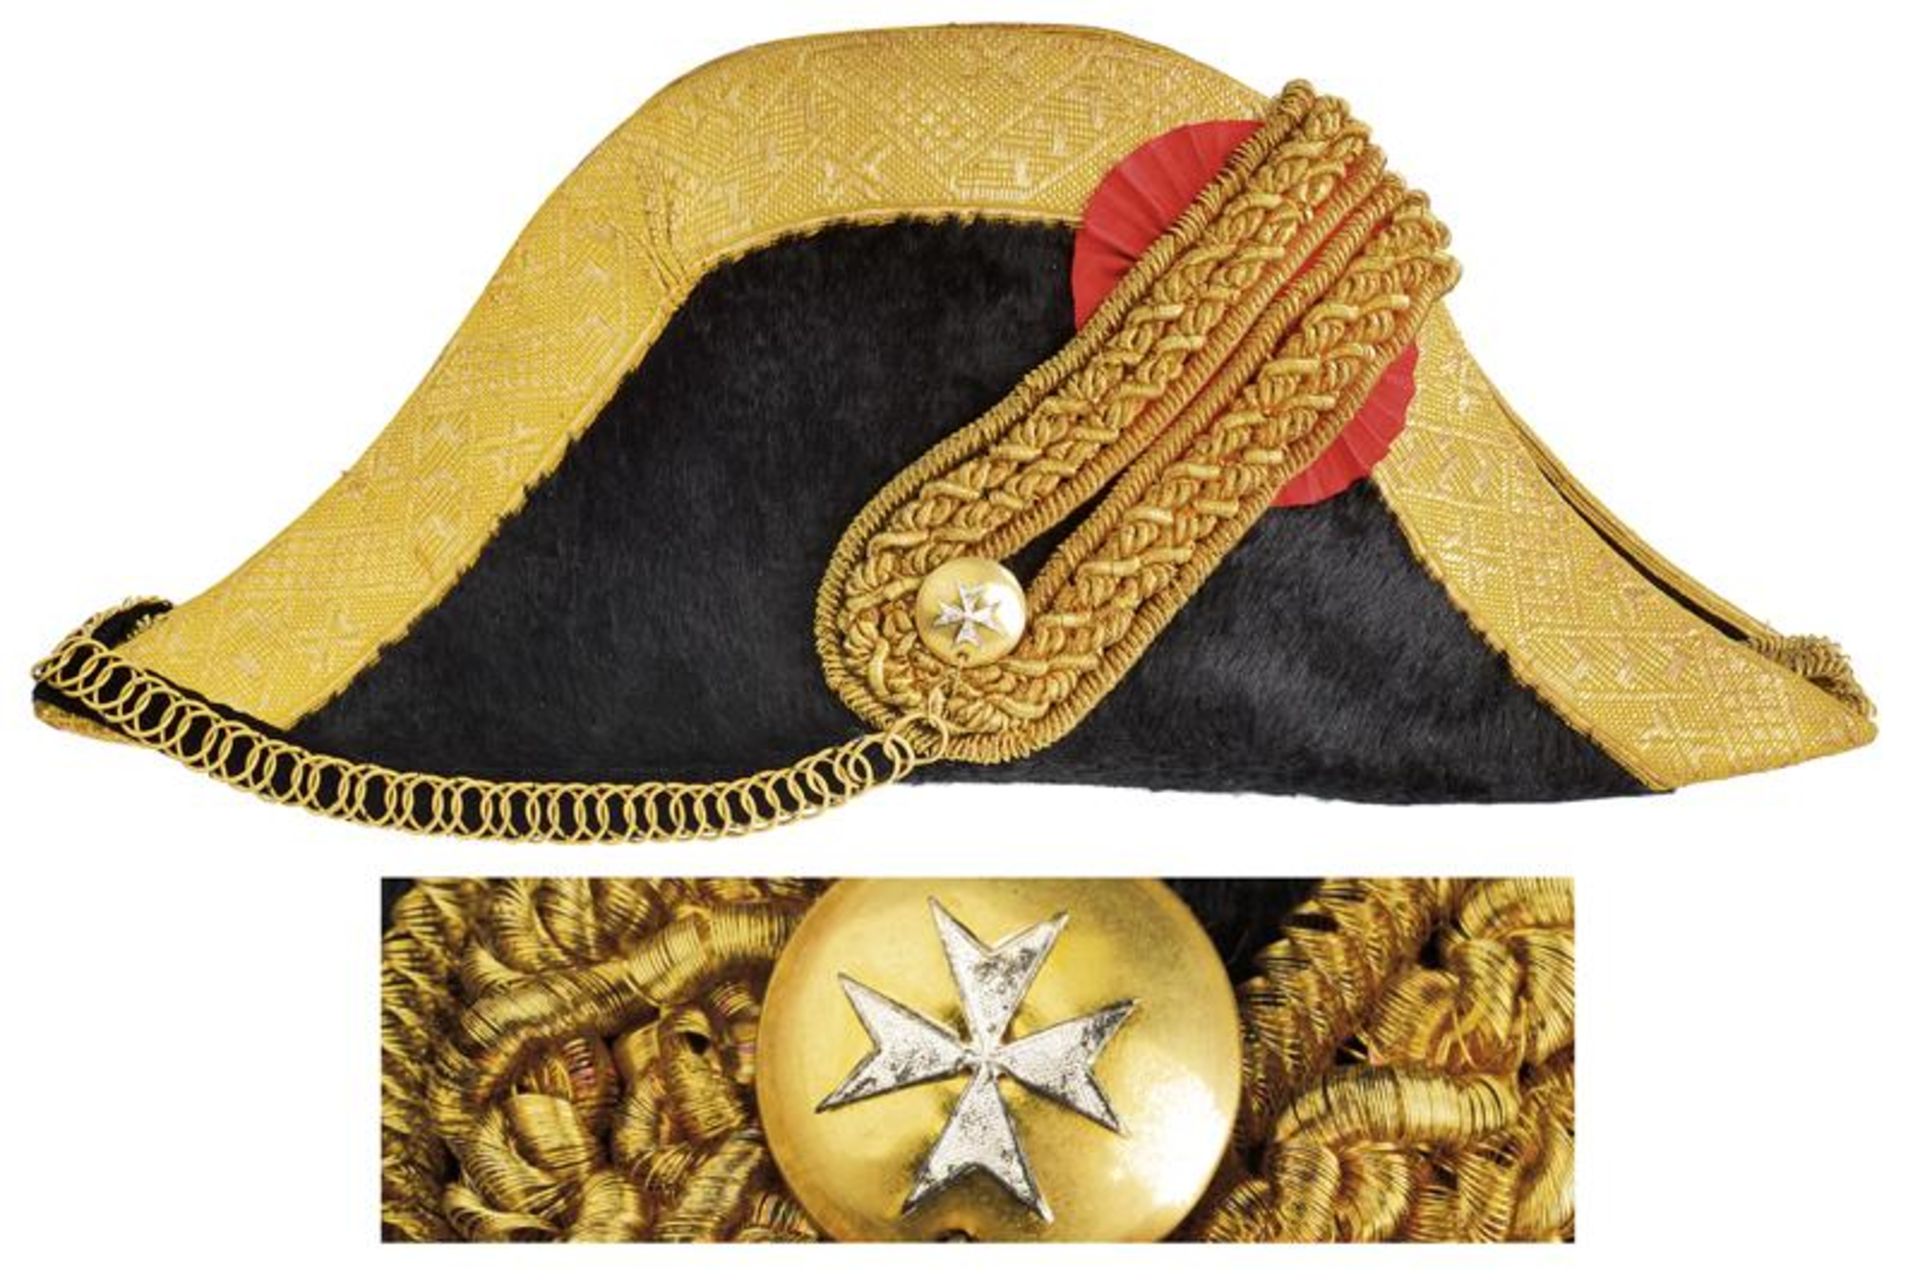 A bicorn of the Sovereign Military Order of Malta